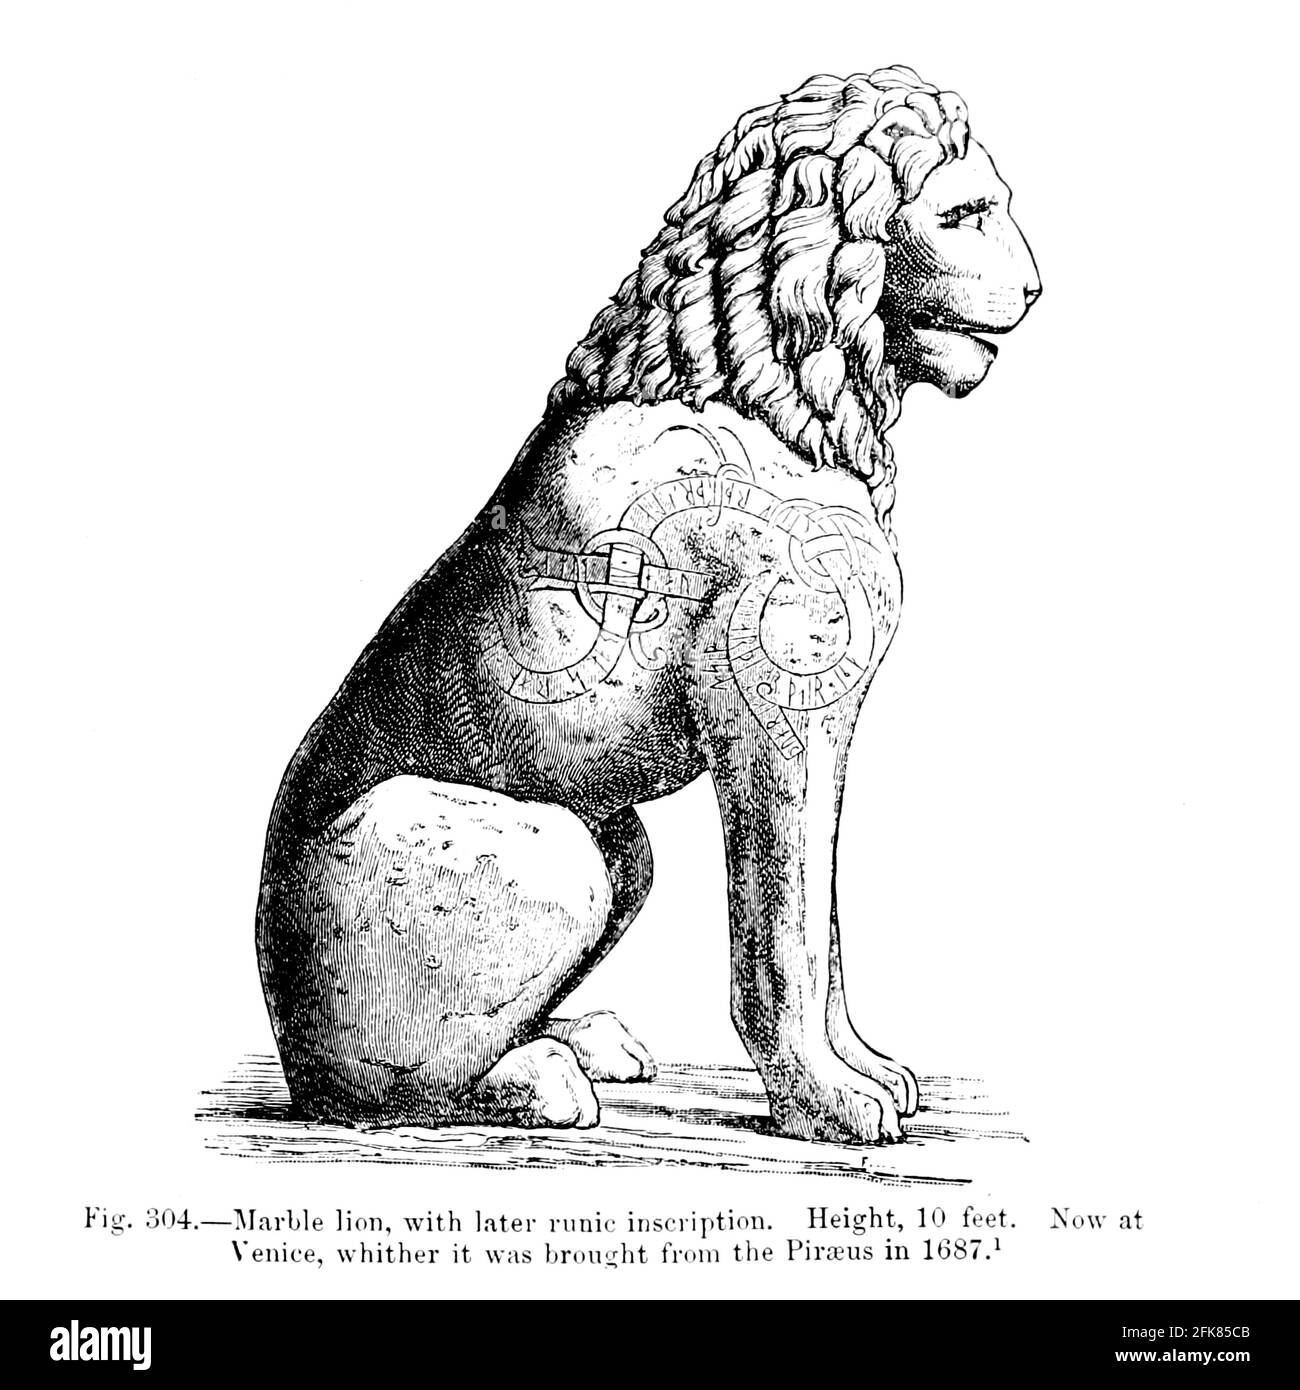 Marble lion, with later runic inscription. Now at Venice, whither it was brought from the Piraeus in 1687 from the book '  The viking age: the early history, manners, and customs of the ancestors of the English speaking nations ' by Du Chaillu, (Paul Belloni), 1835-1903 Publication date 1889 by C. Scribner's sons in New York, Stock Photo